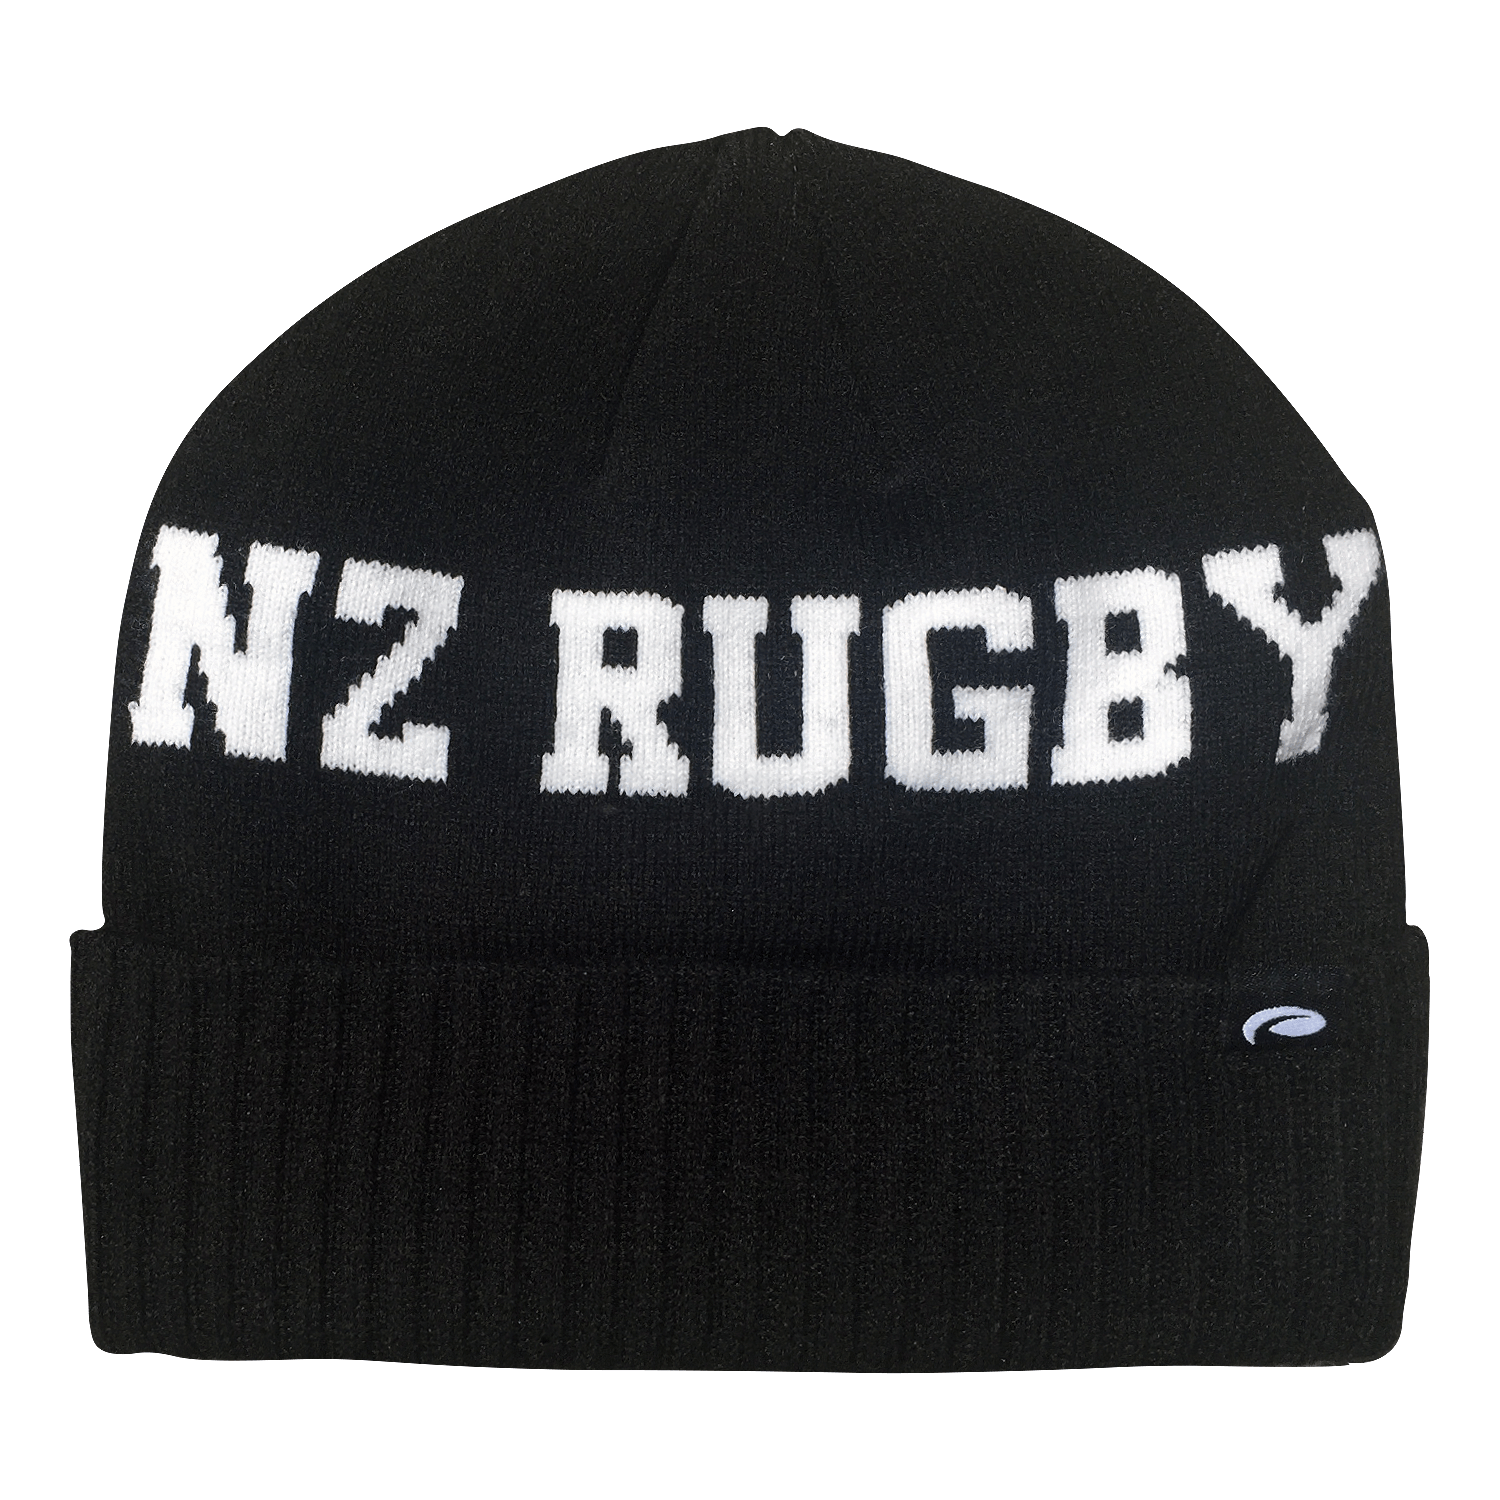 Rugby Imports New Zealand Rugby Flag Cuffed Beanie